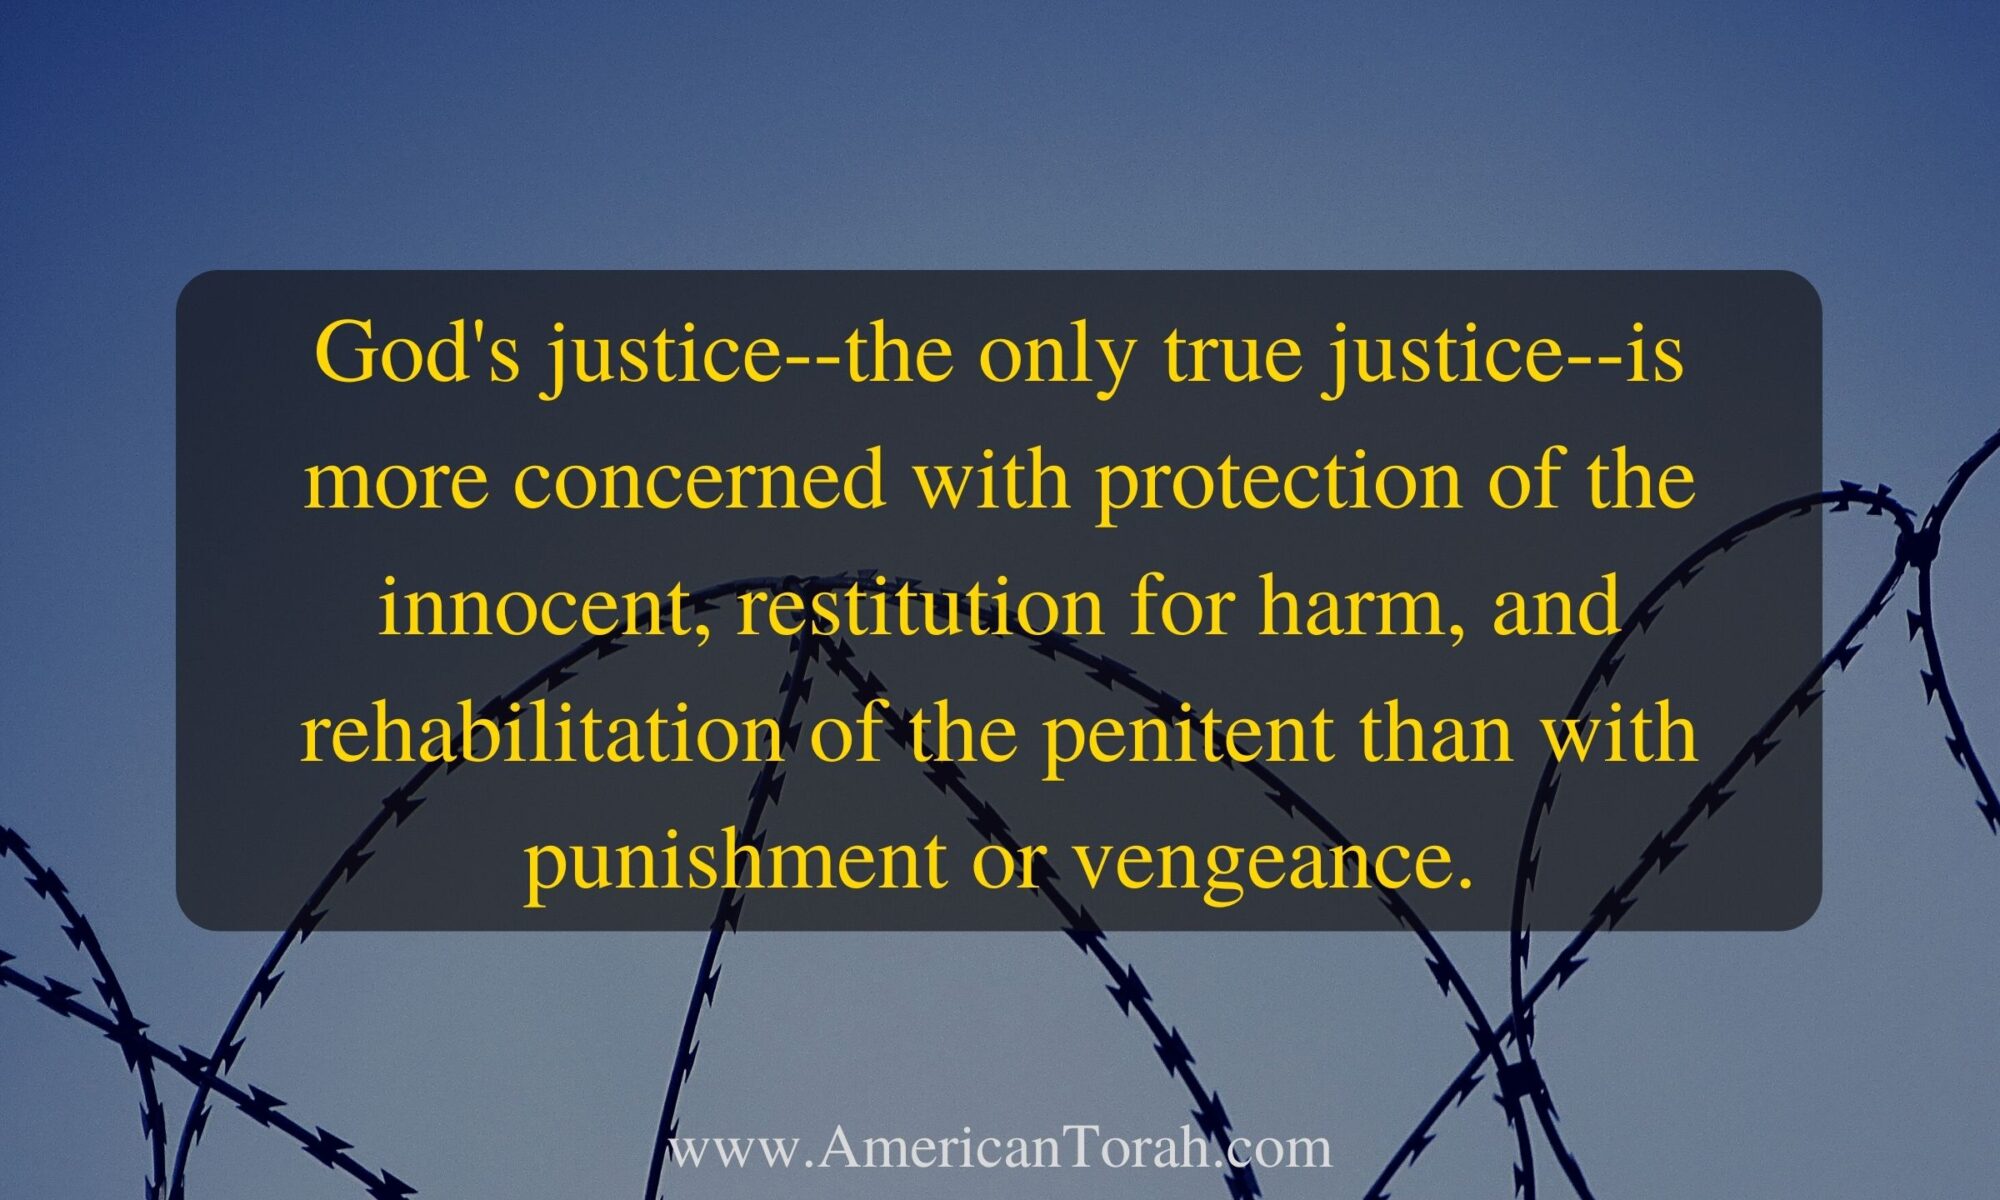 God's justice--the only true justice--is more concerned with protection of the innocent, restitution for harm, and rehabilitation of the penitent than with punishment or vengeance.